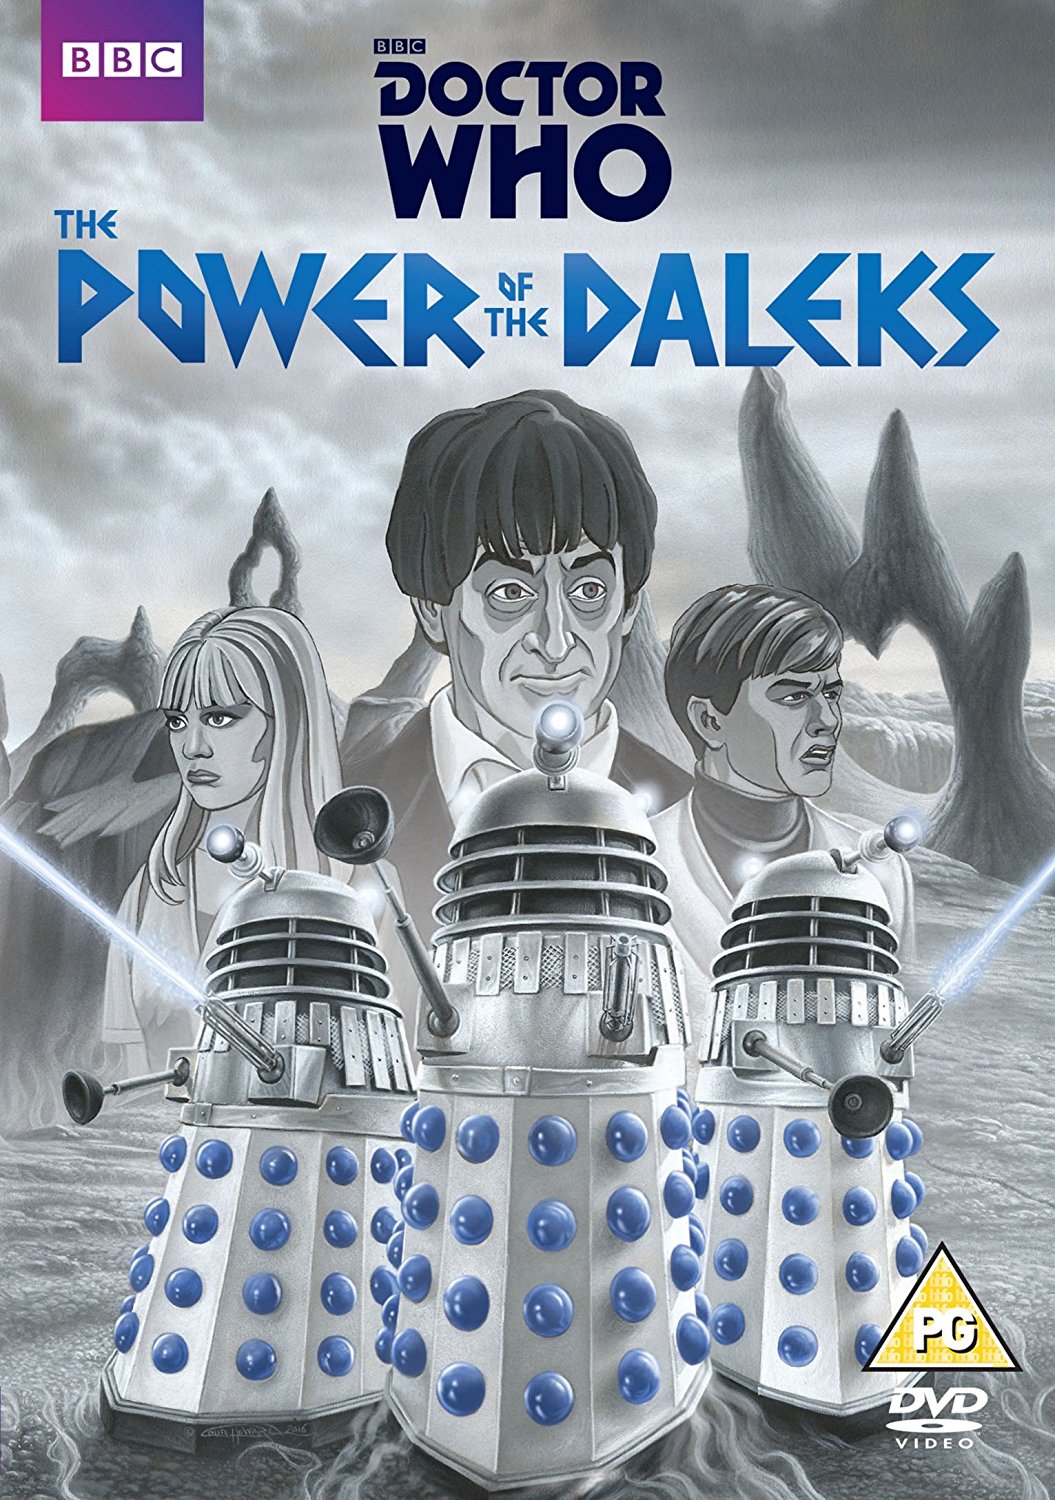 Doctor Who: The Power Of The Daleks DVD review